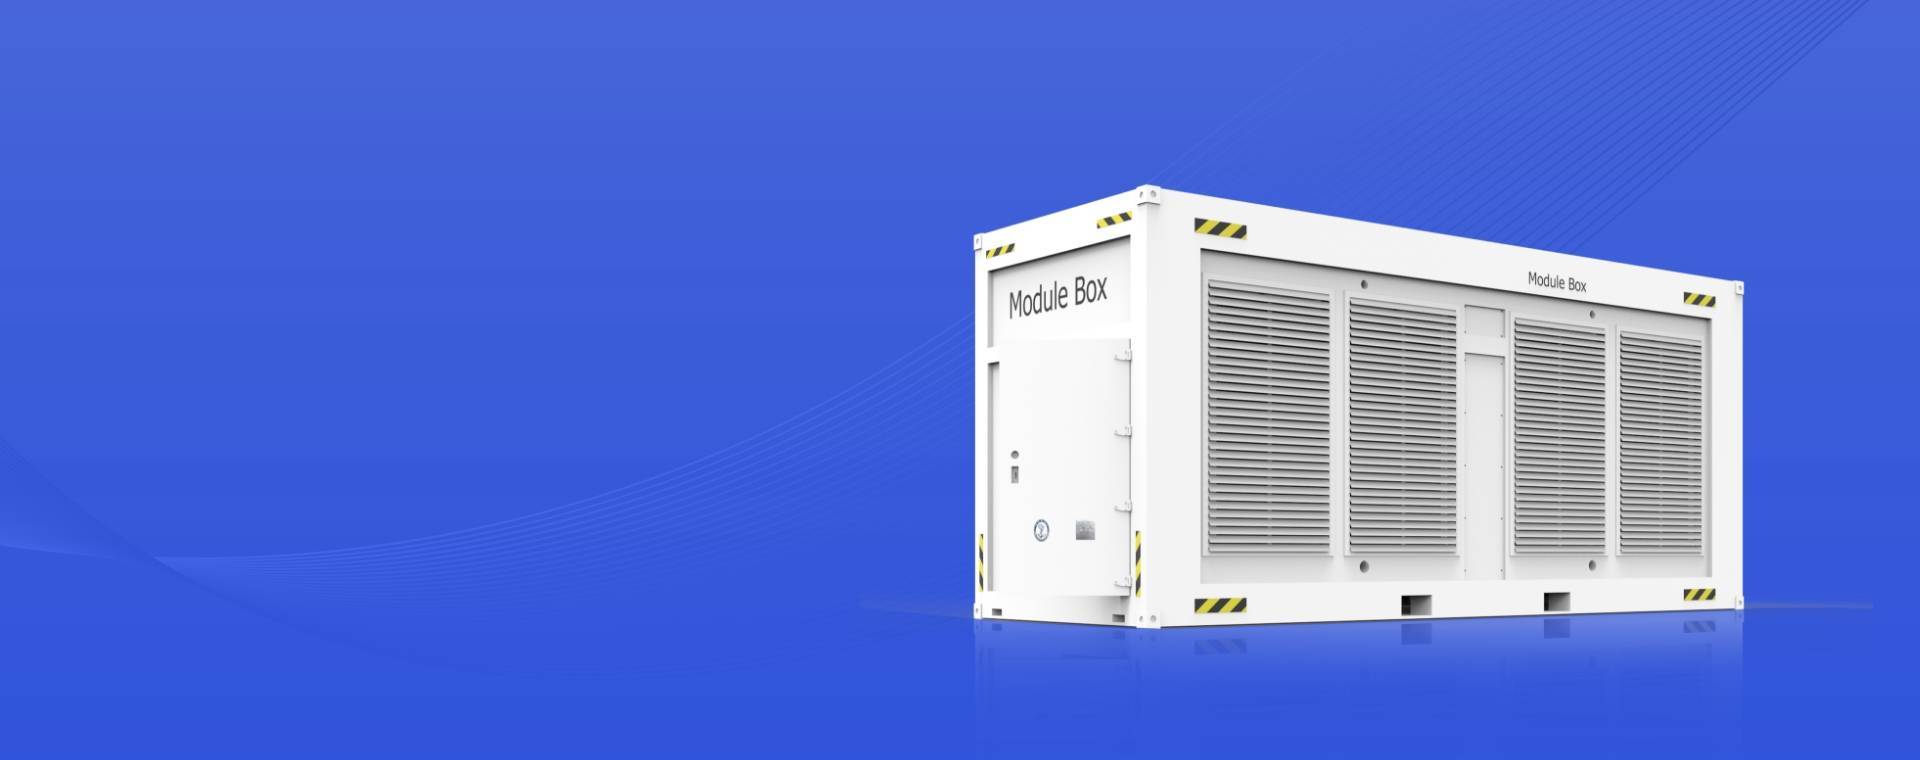 A mobile mining container on blue background.